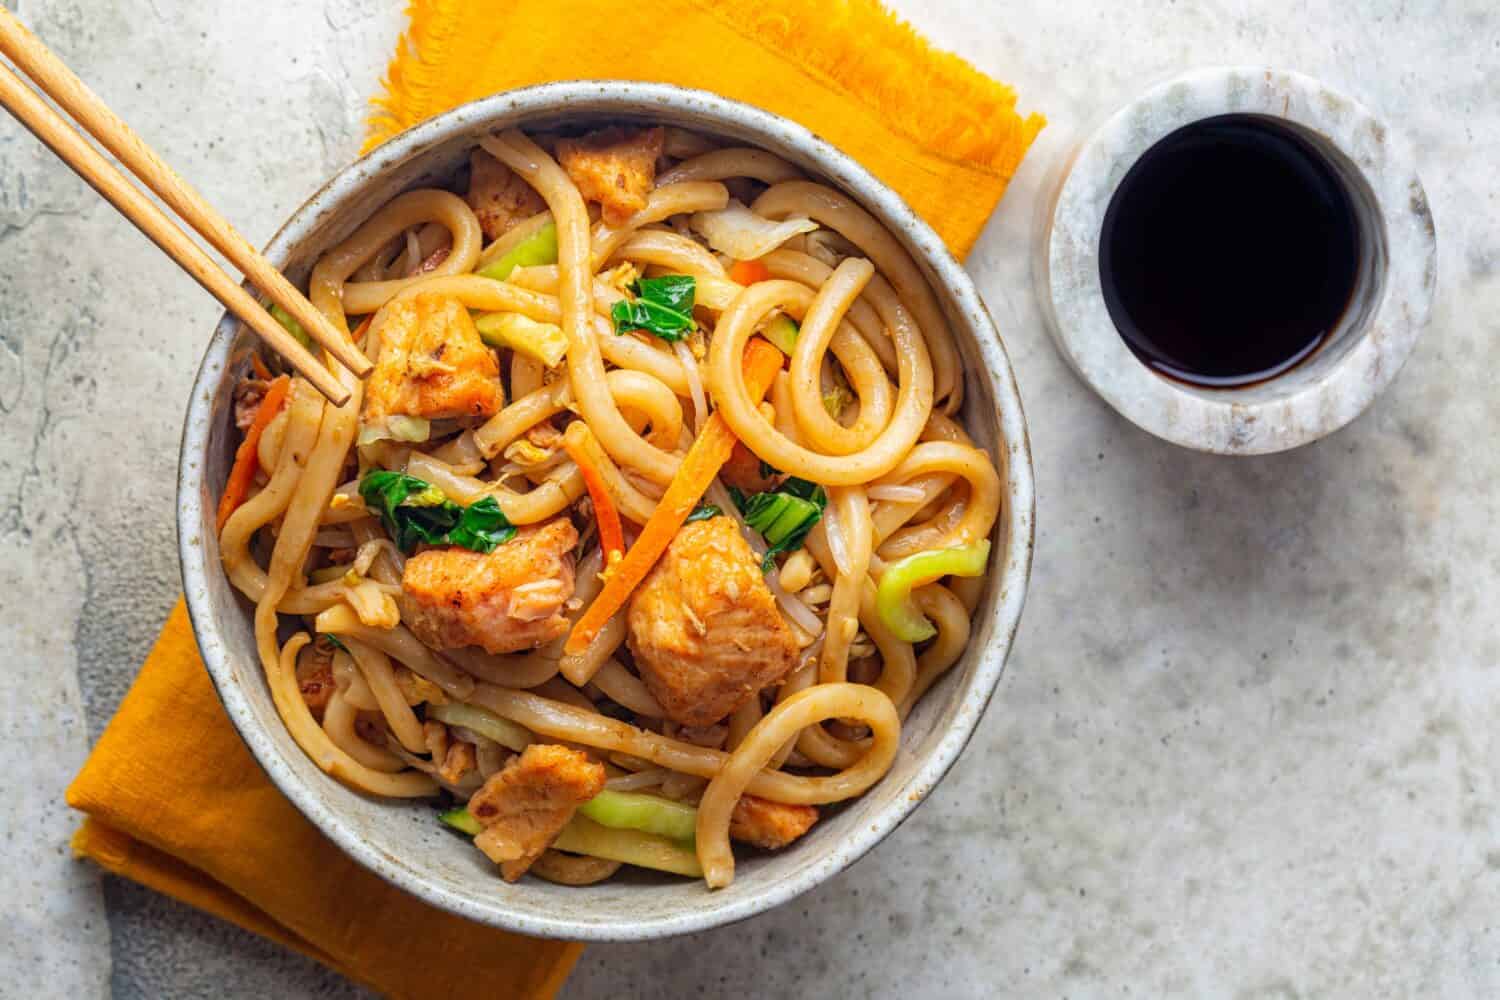 Stir Fried Yaki Udon Noodles with Salmon Fish, Vegetables and Soy-based Sauce. Directly above.